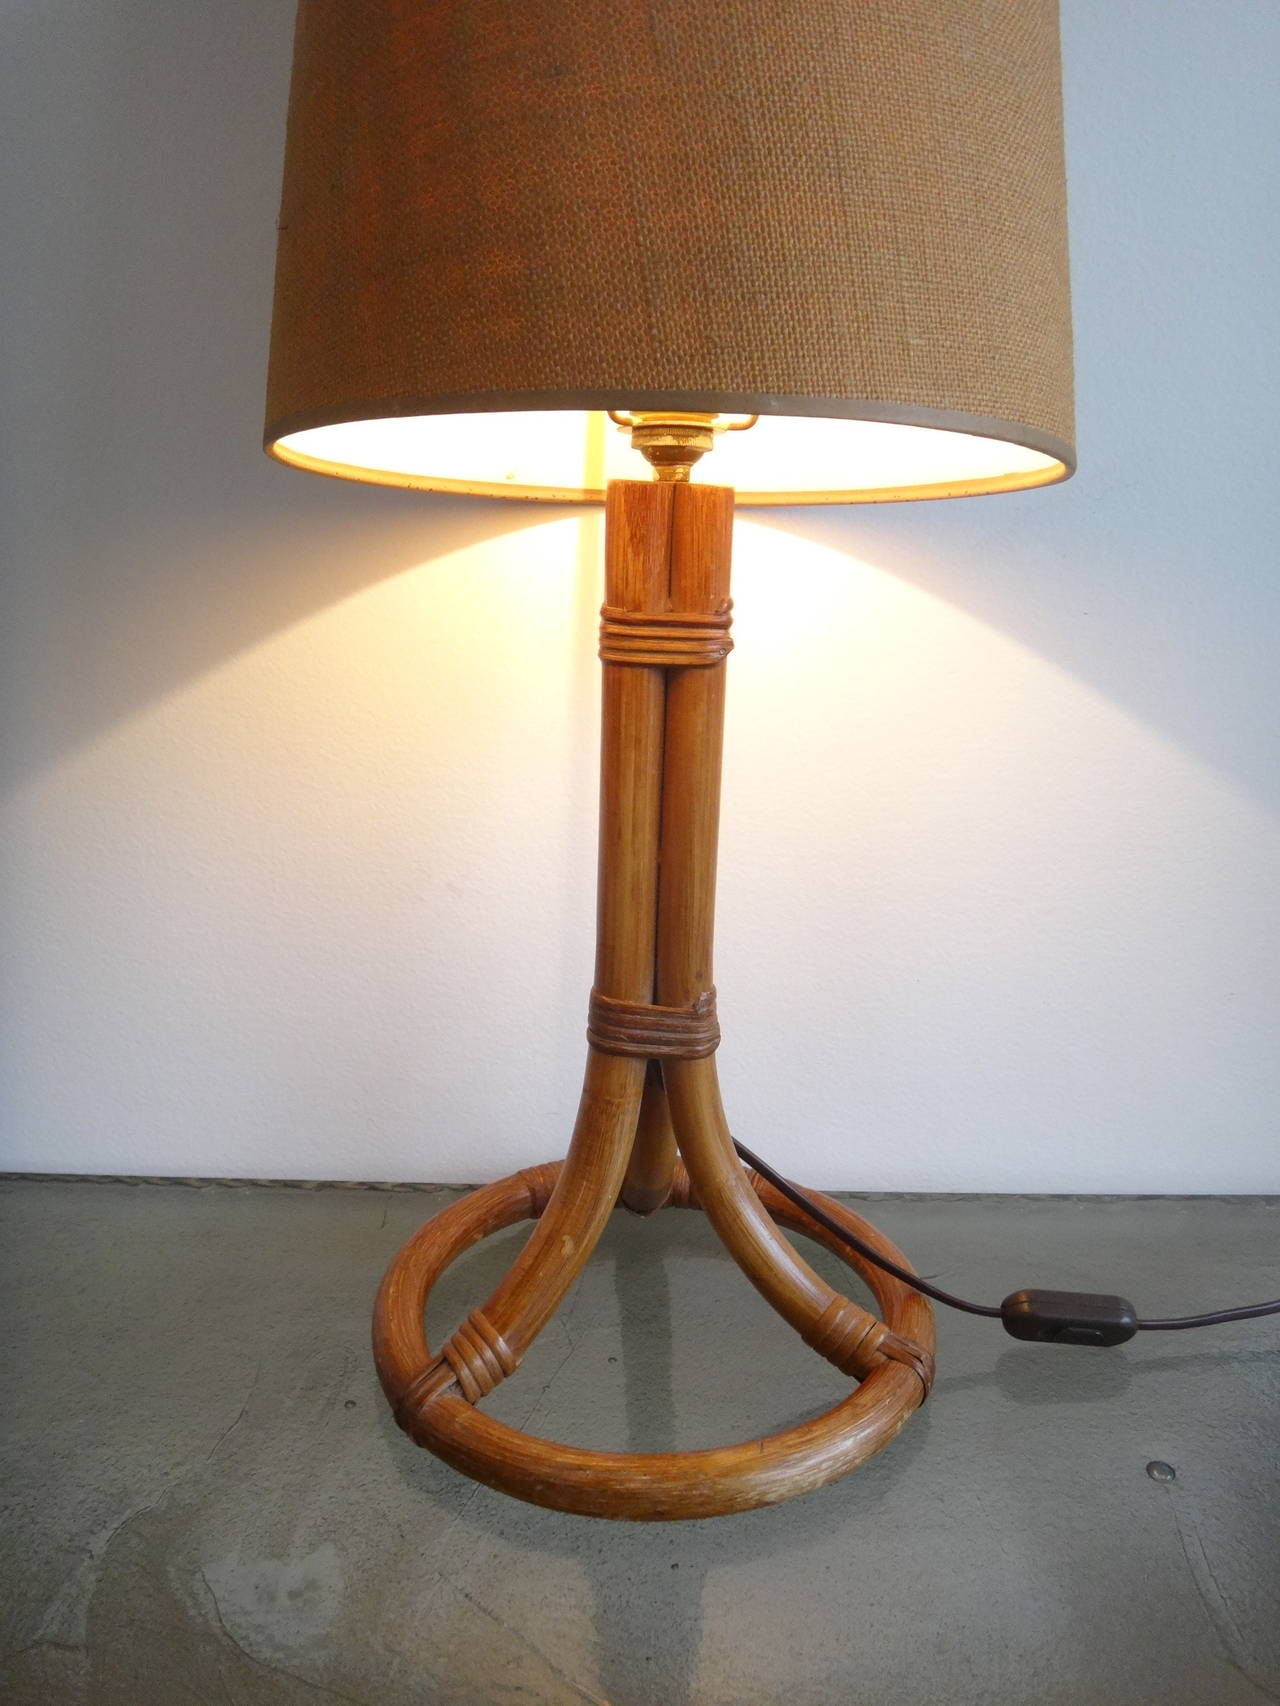 Rattan Table lamp by Louis Sognot - France 1960's - Ipso Facto